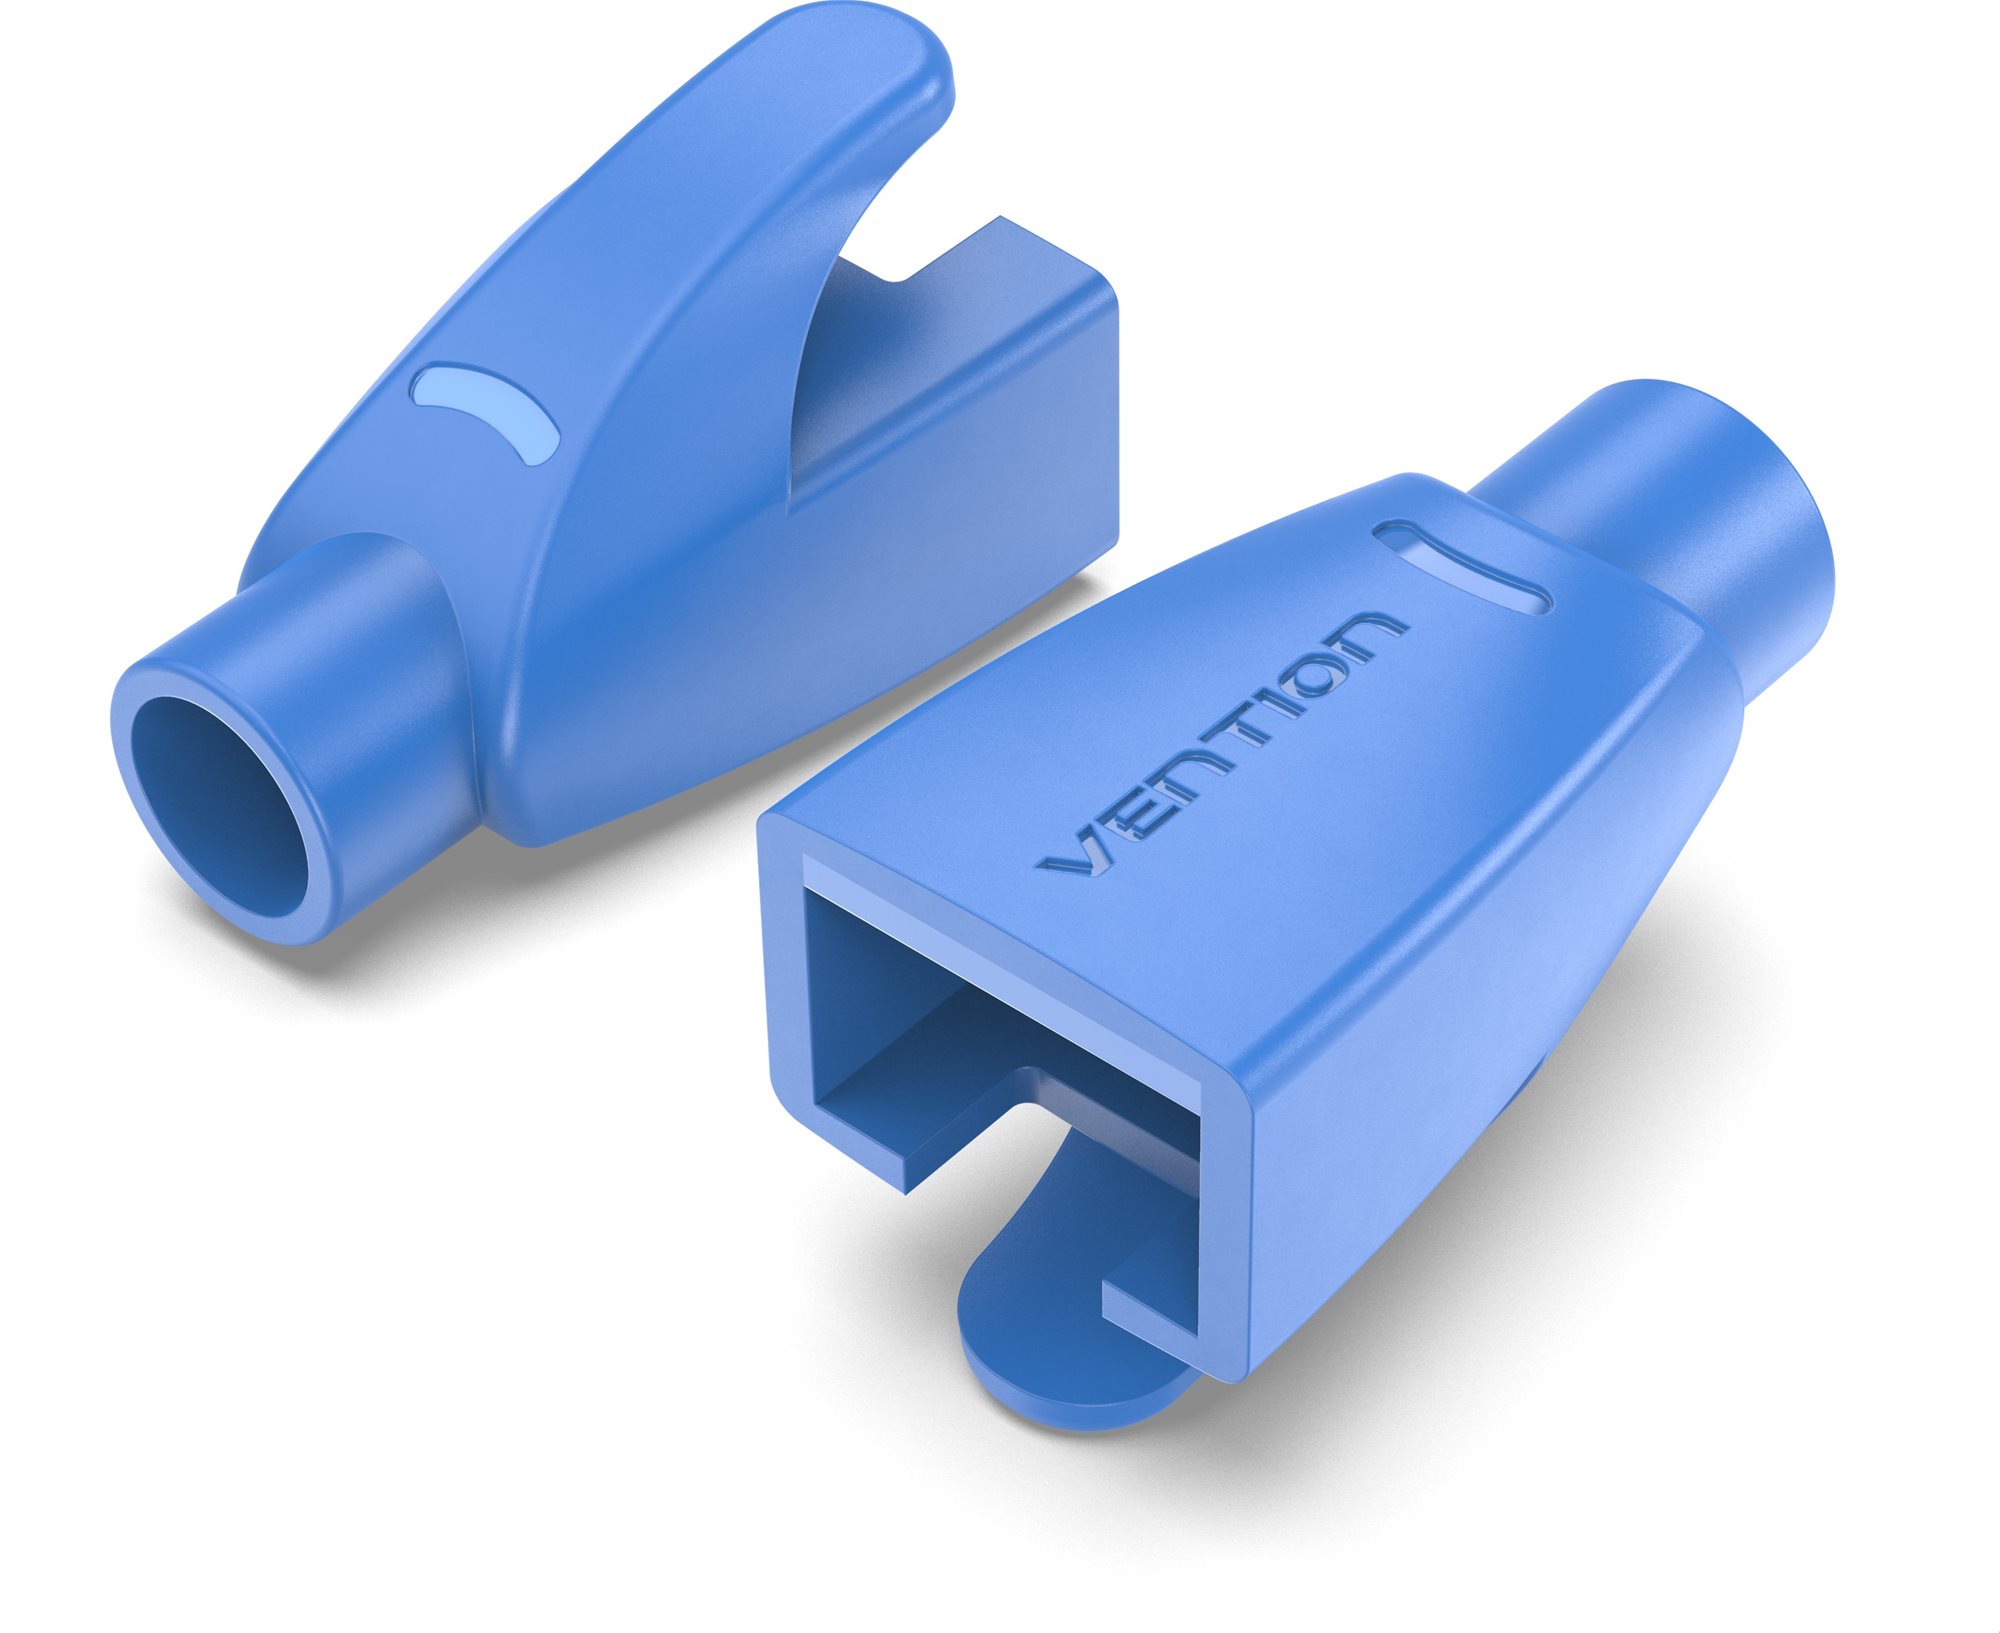 Vention RJ45 Strain Relief Boots Blue PVC Type 100 Pack